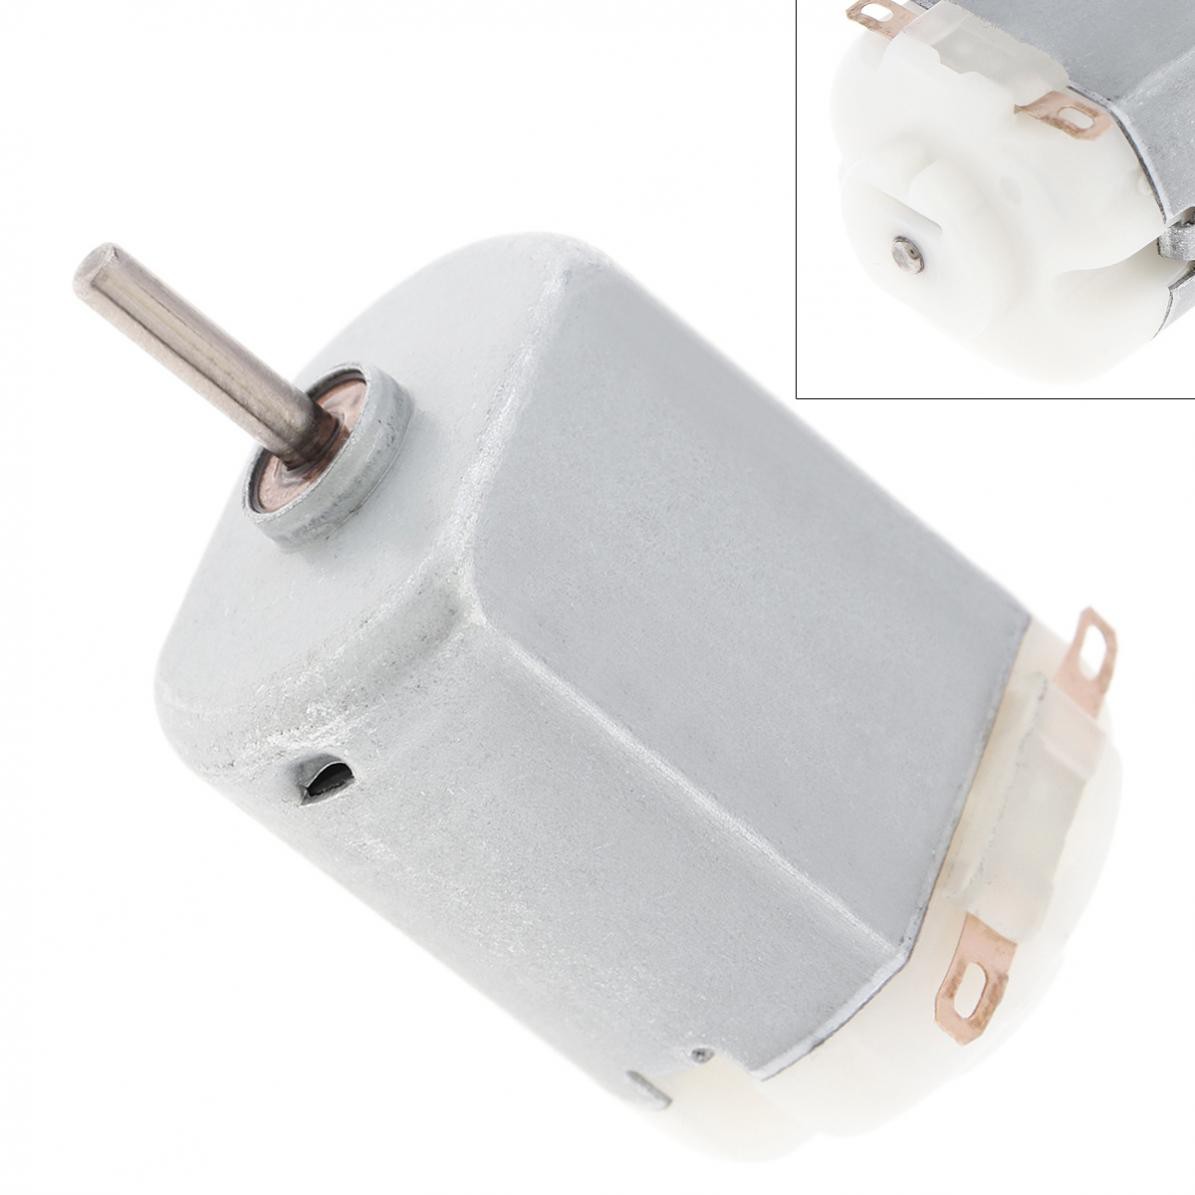 130 3V 2.1A 12300RPM Micro DC Motor Mini Small Motor with Carbon Brush